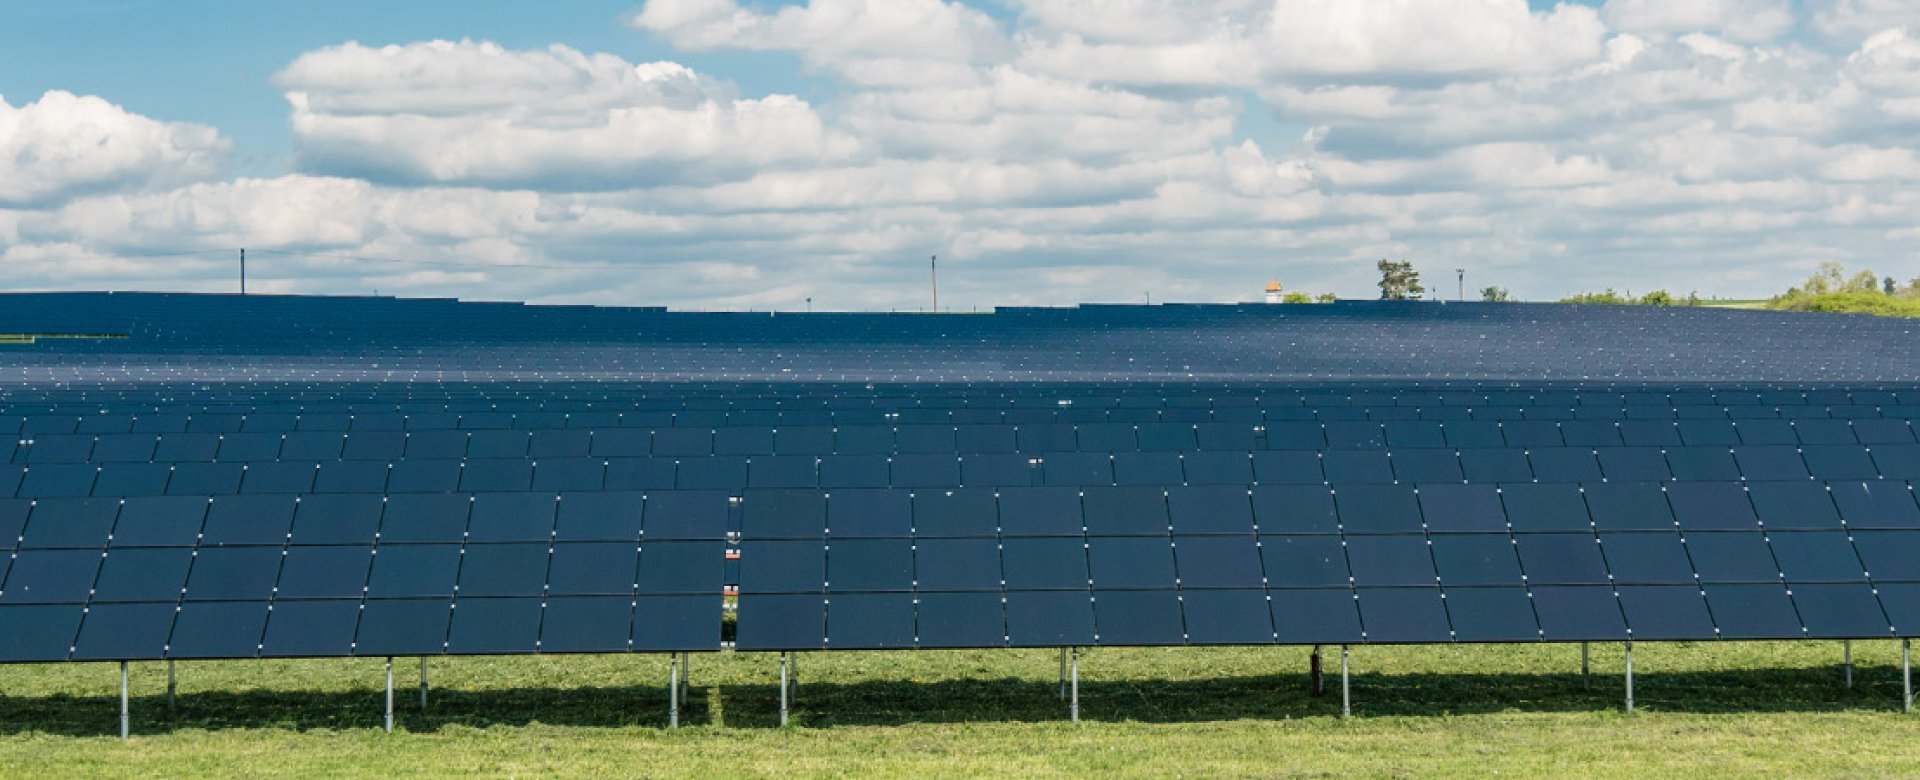 24 FIELD PHOTOVOLTAIC POWER PLANTS